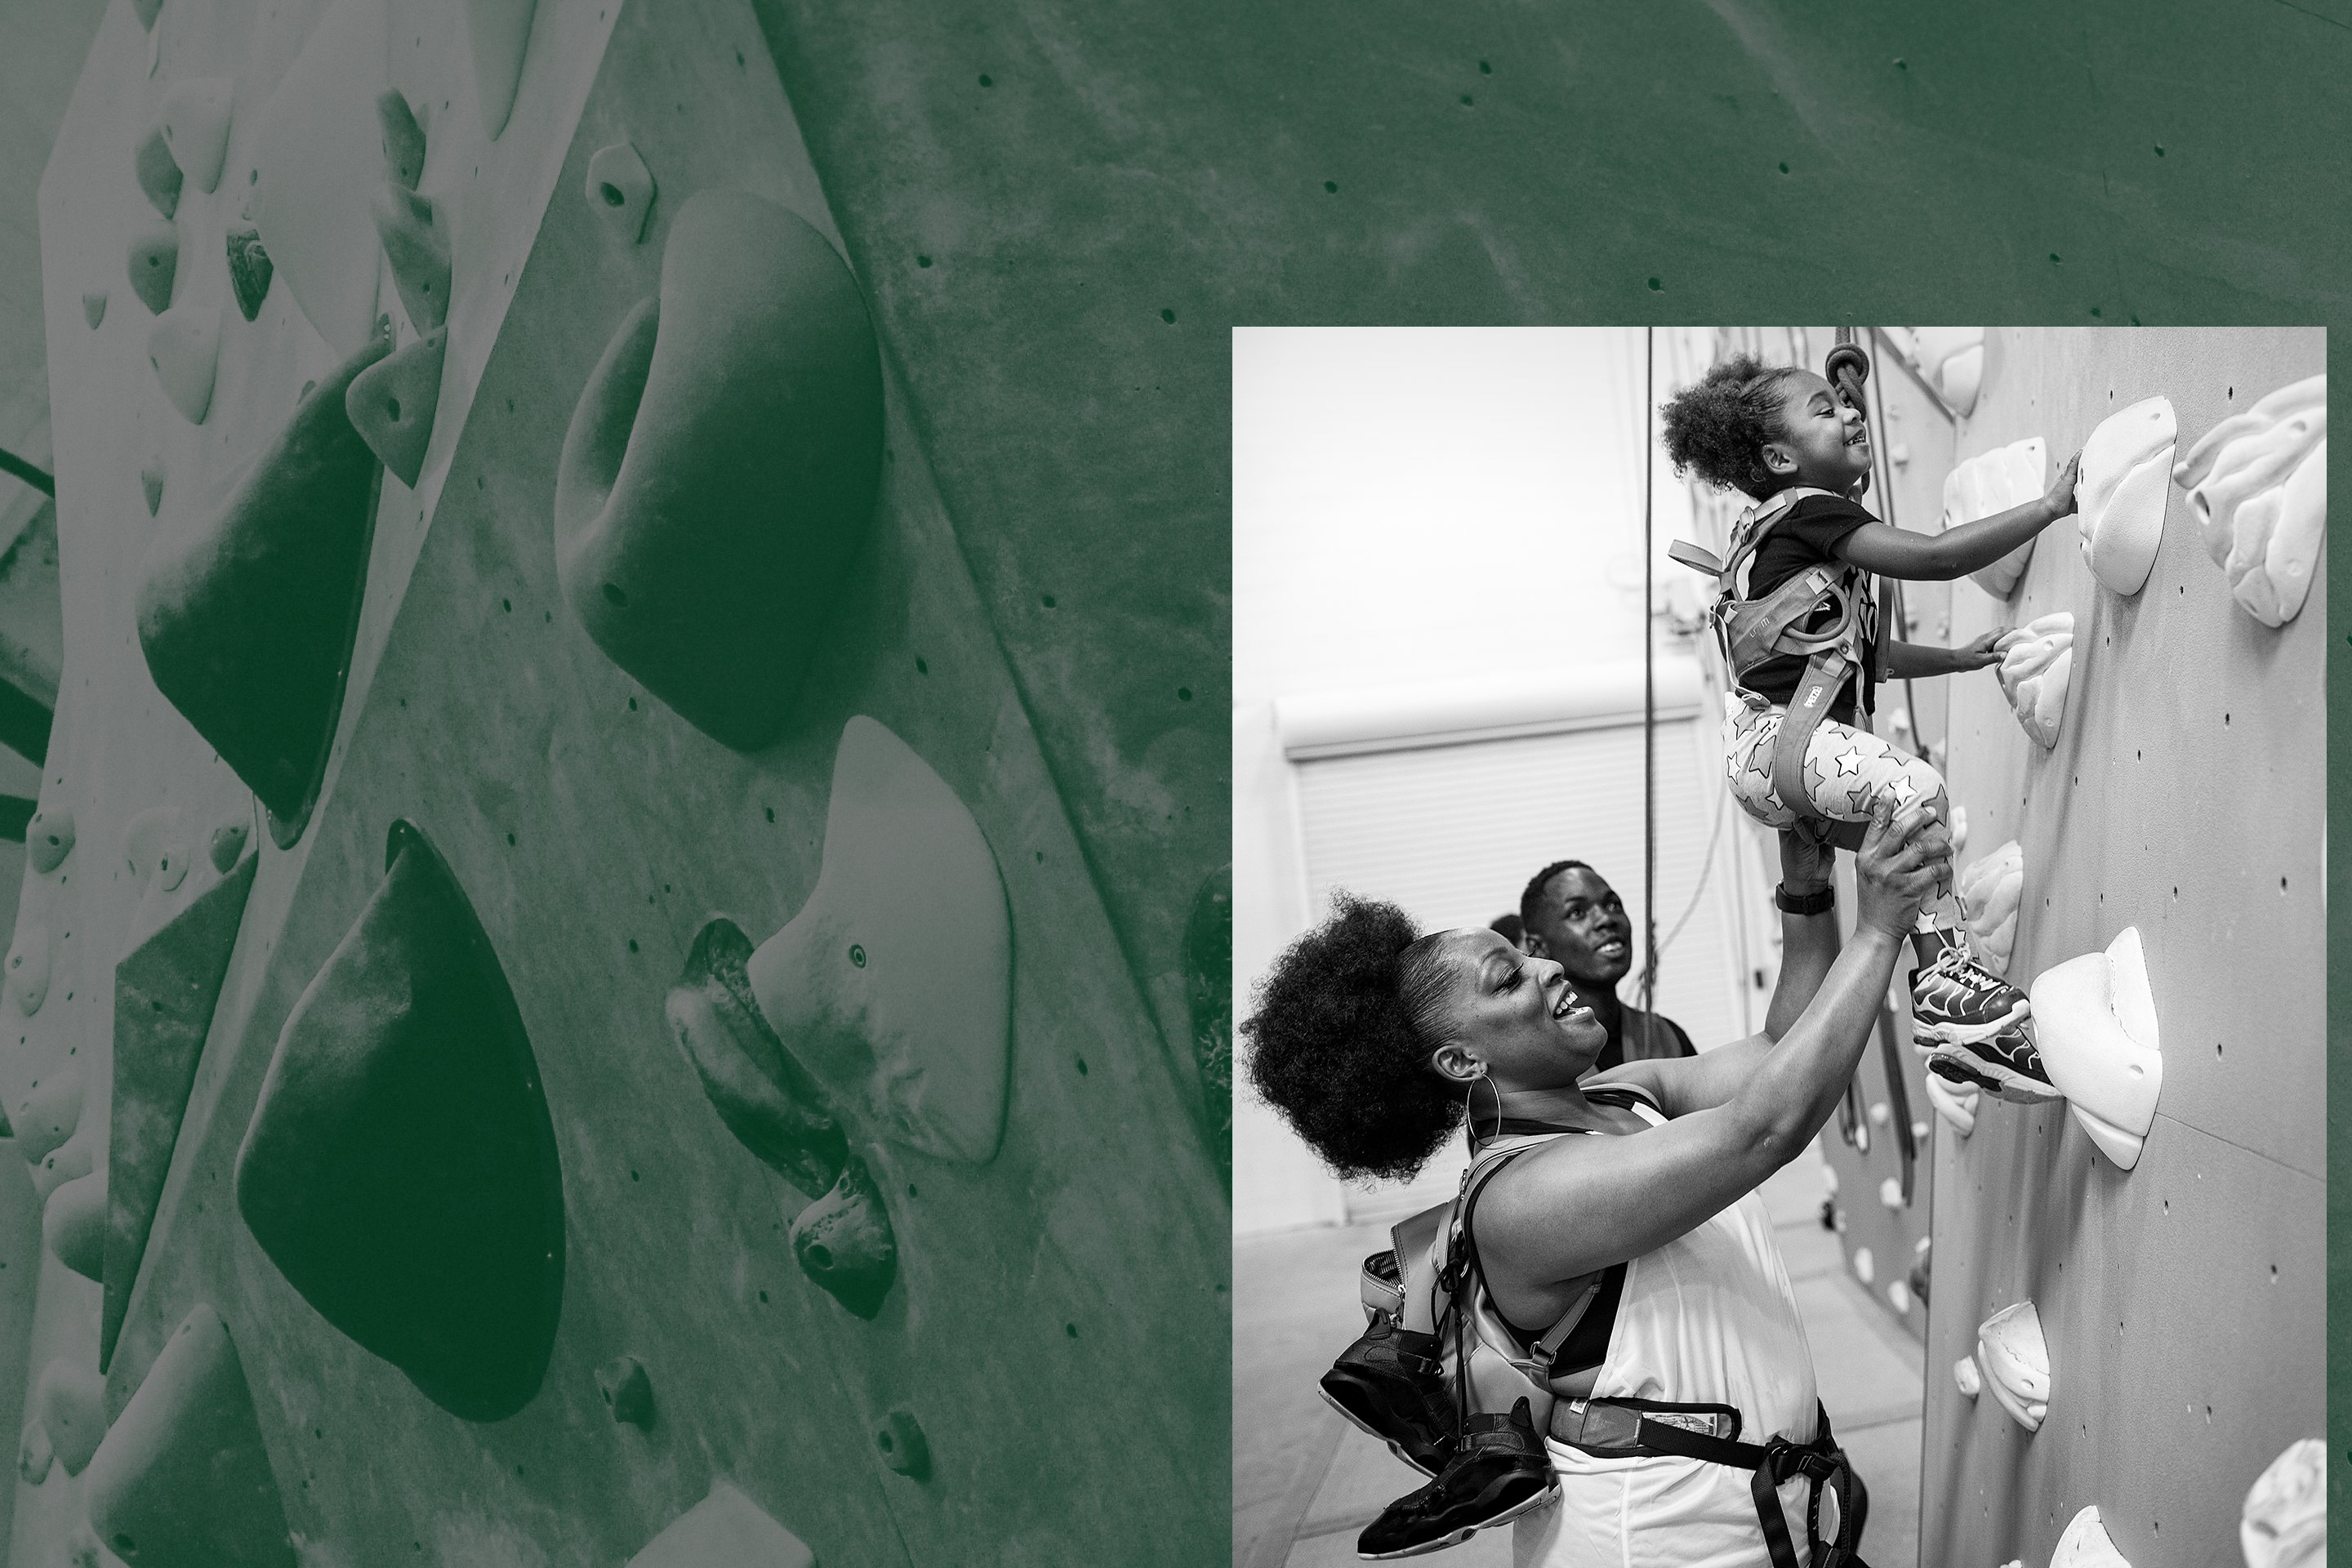 A young climber enjoys learning on an indoor rock wall.